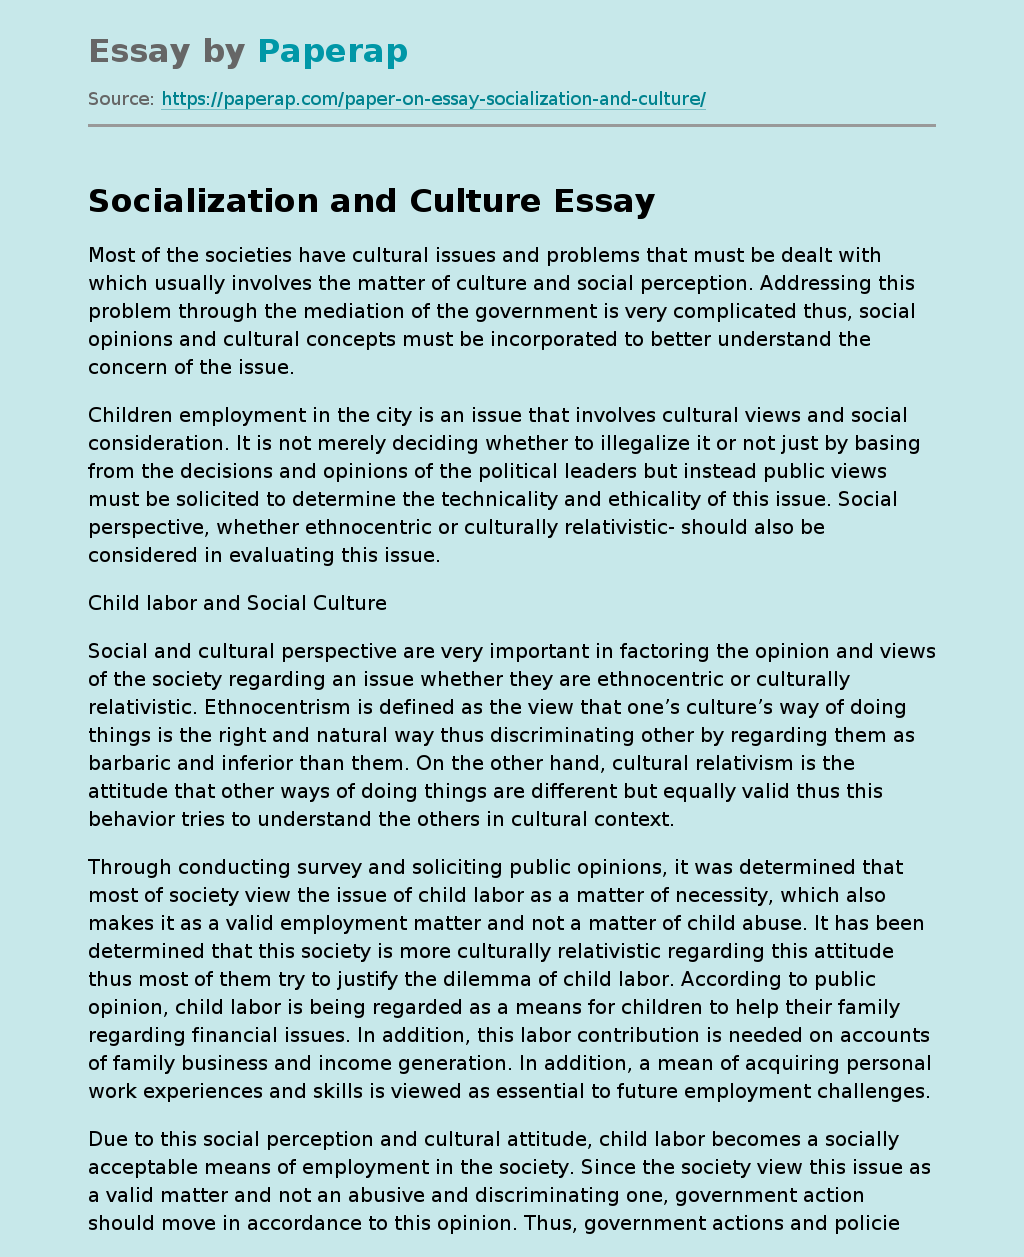 Socialization and Culture